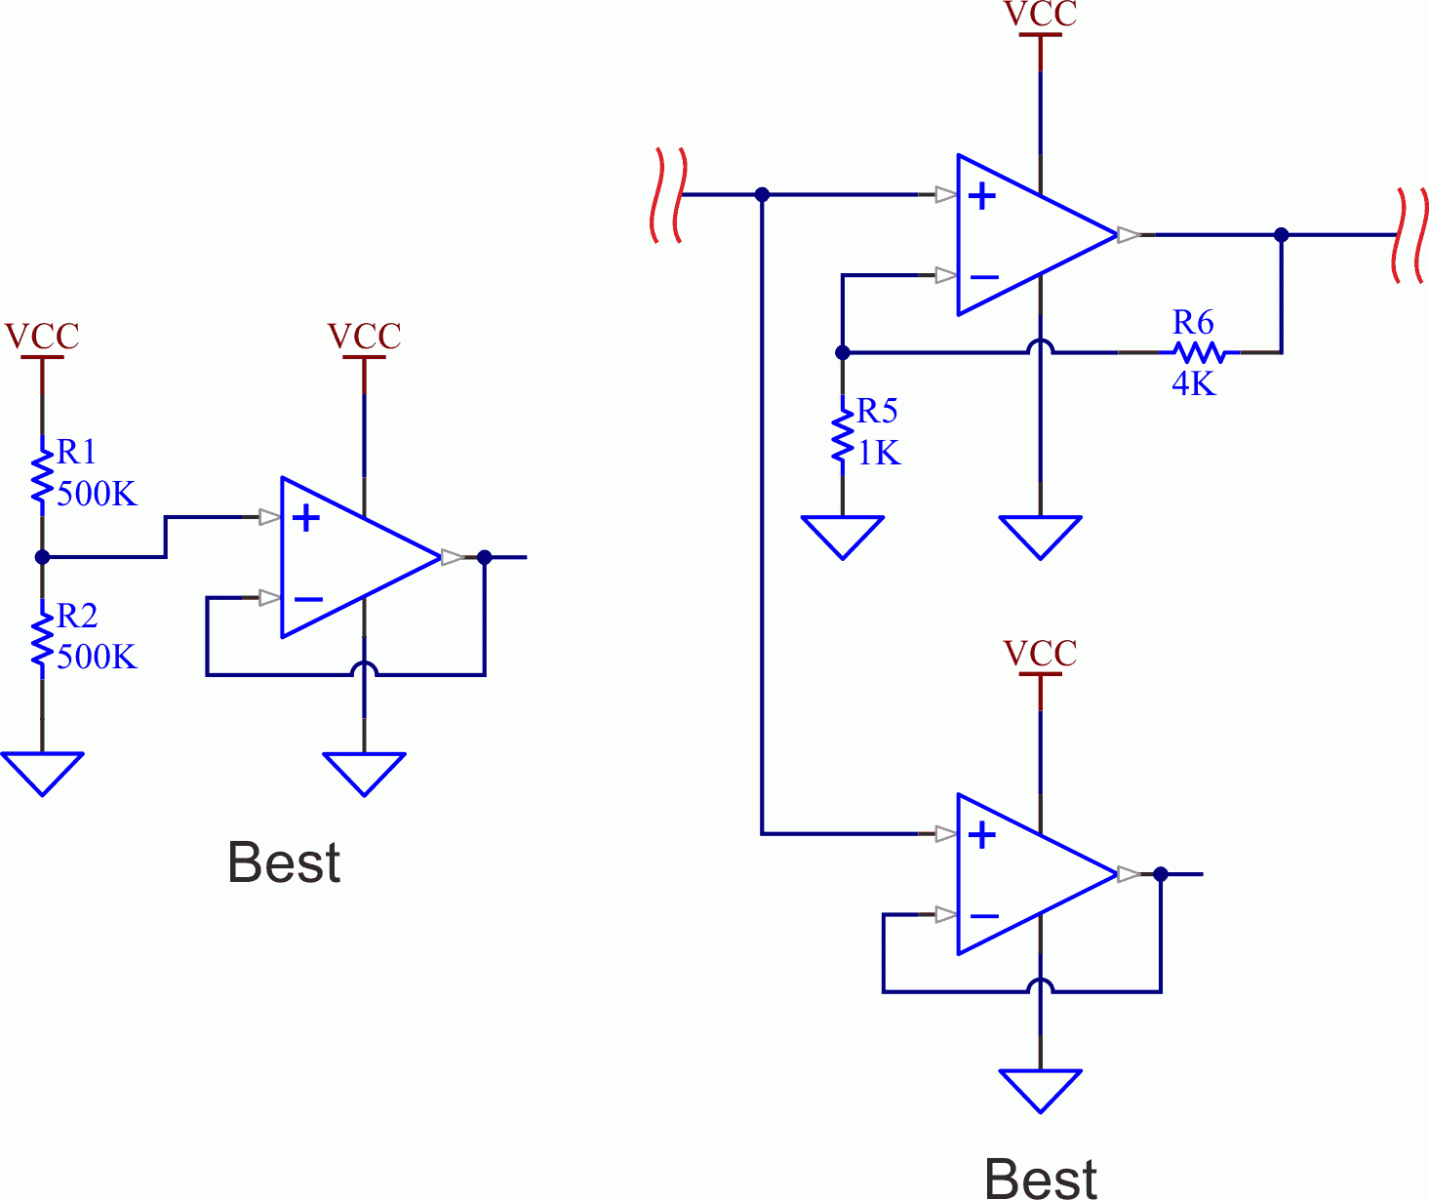 The best way to deal with unused amplifiers is to bias the voltage follower at the midpoint of the common-mode input range. Another way is to just connect the voltage-follower input to another signal.